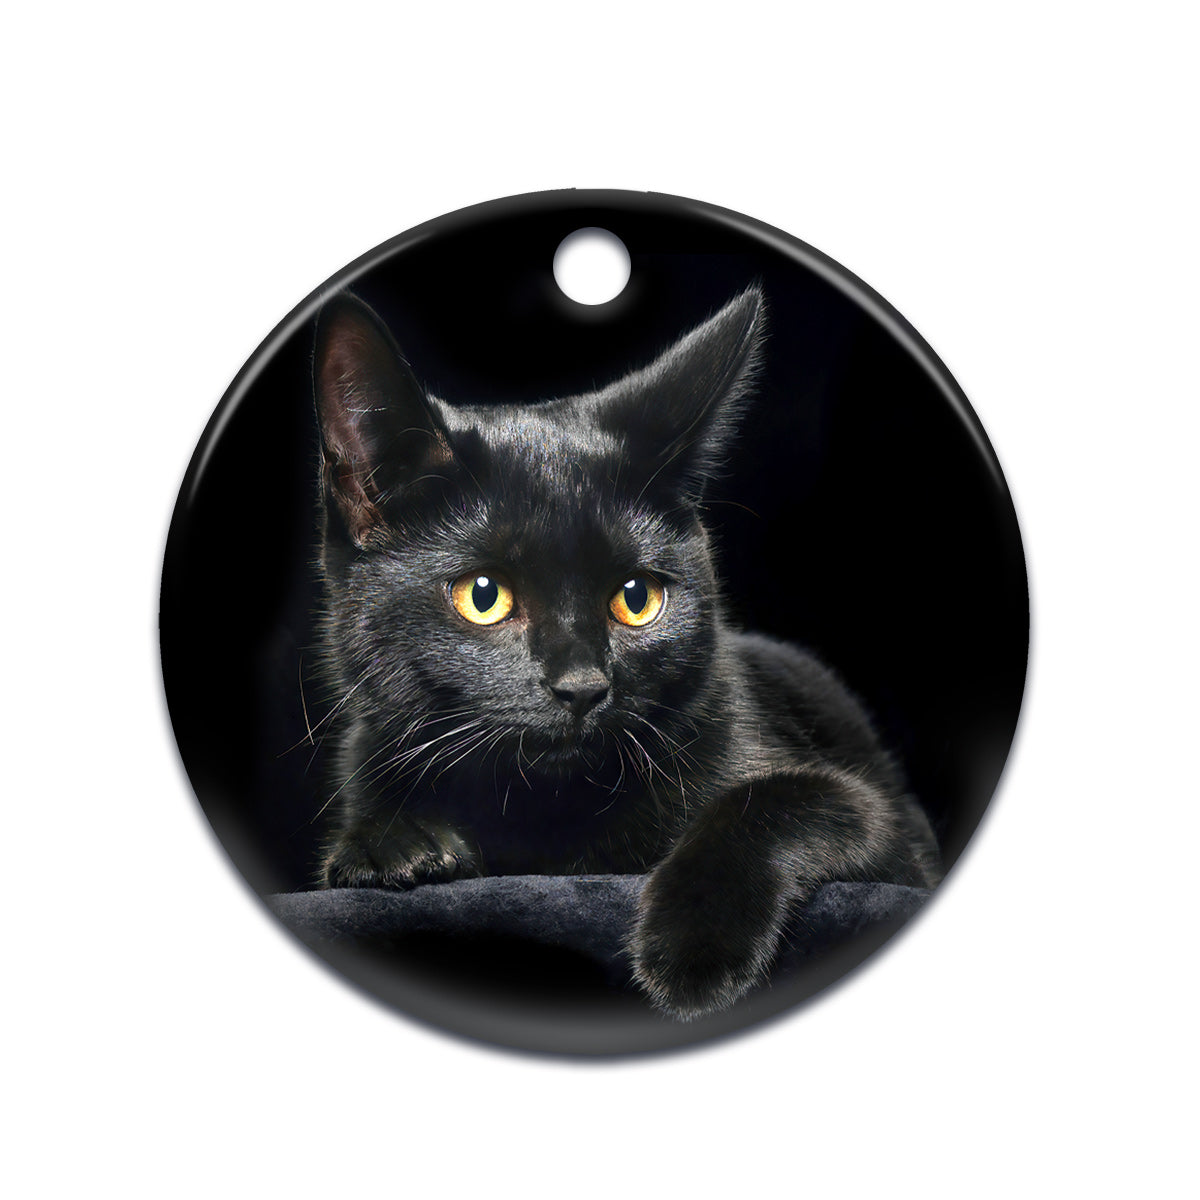 Cute Black Cat - Cat Ornament (Printed On Both Sides) 1022